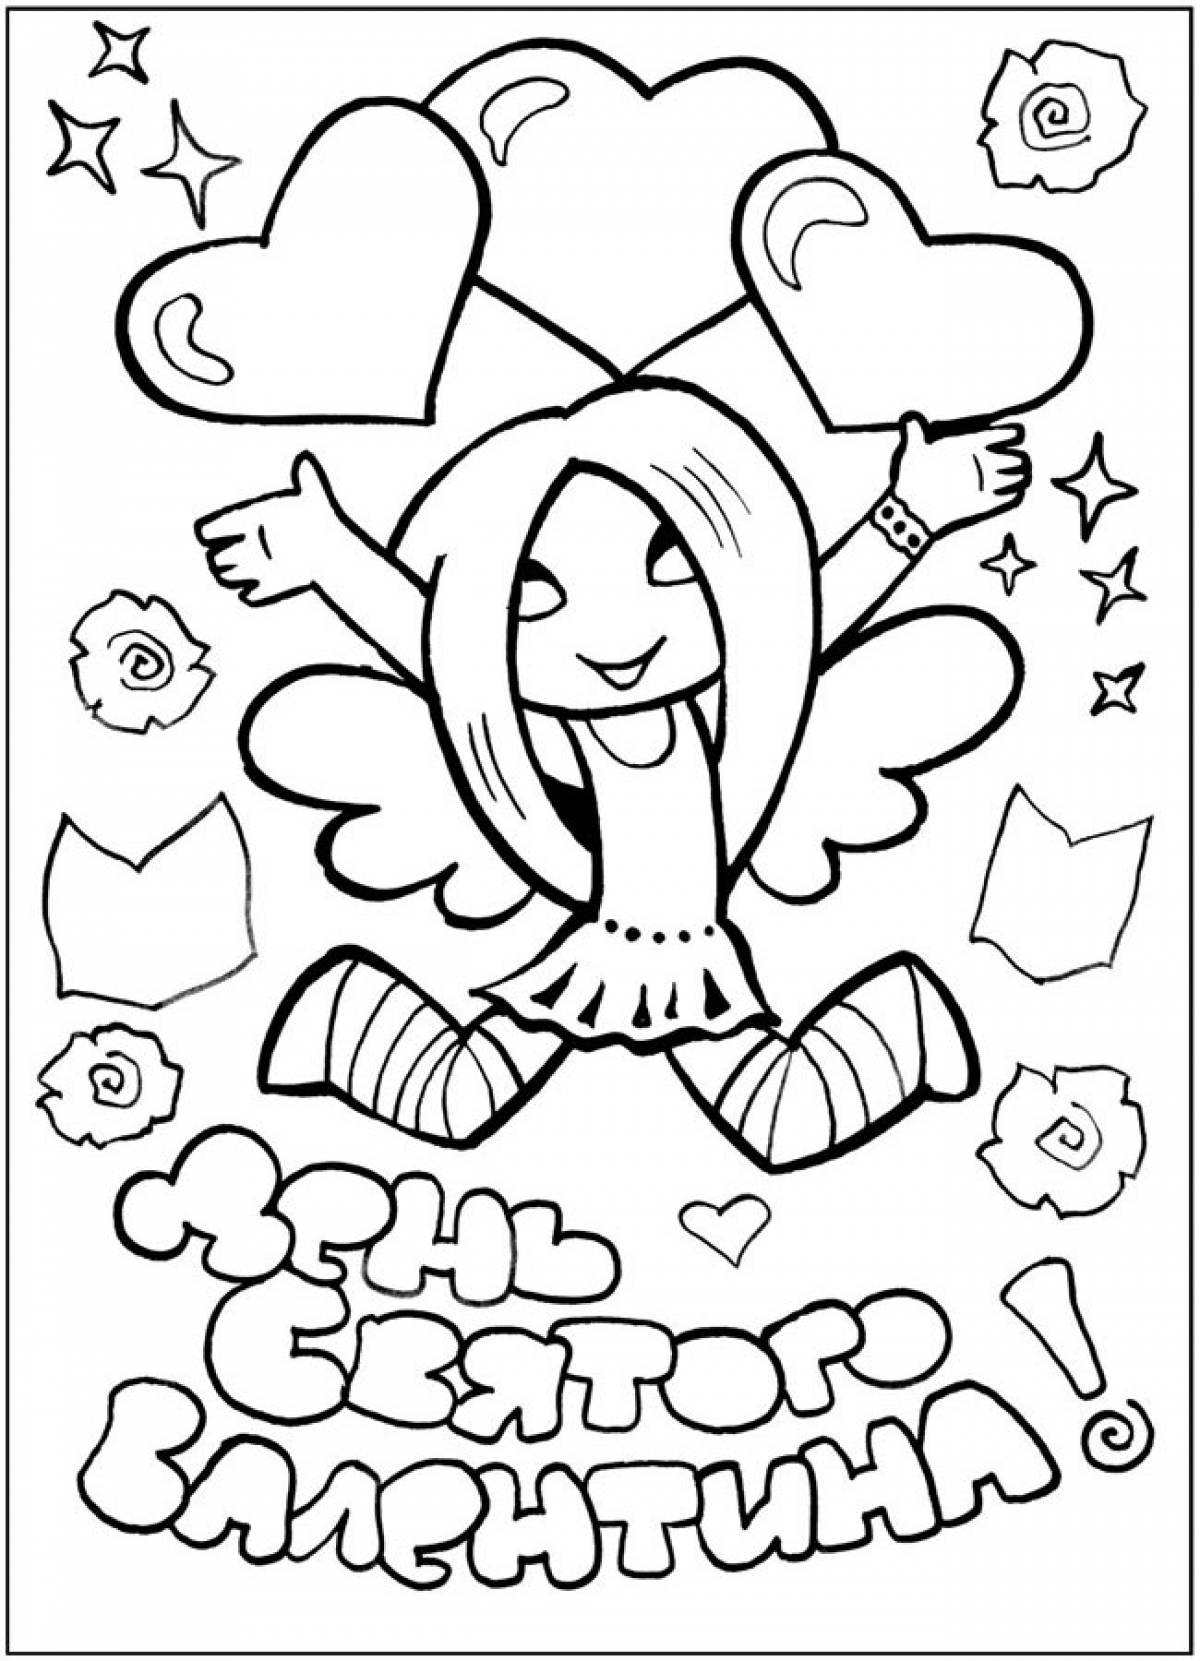 Happy valentines day coloring book